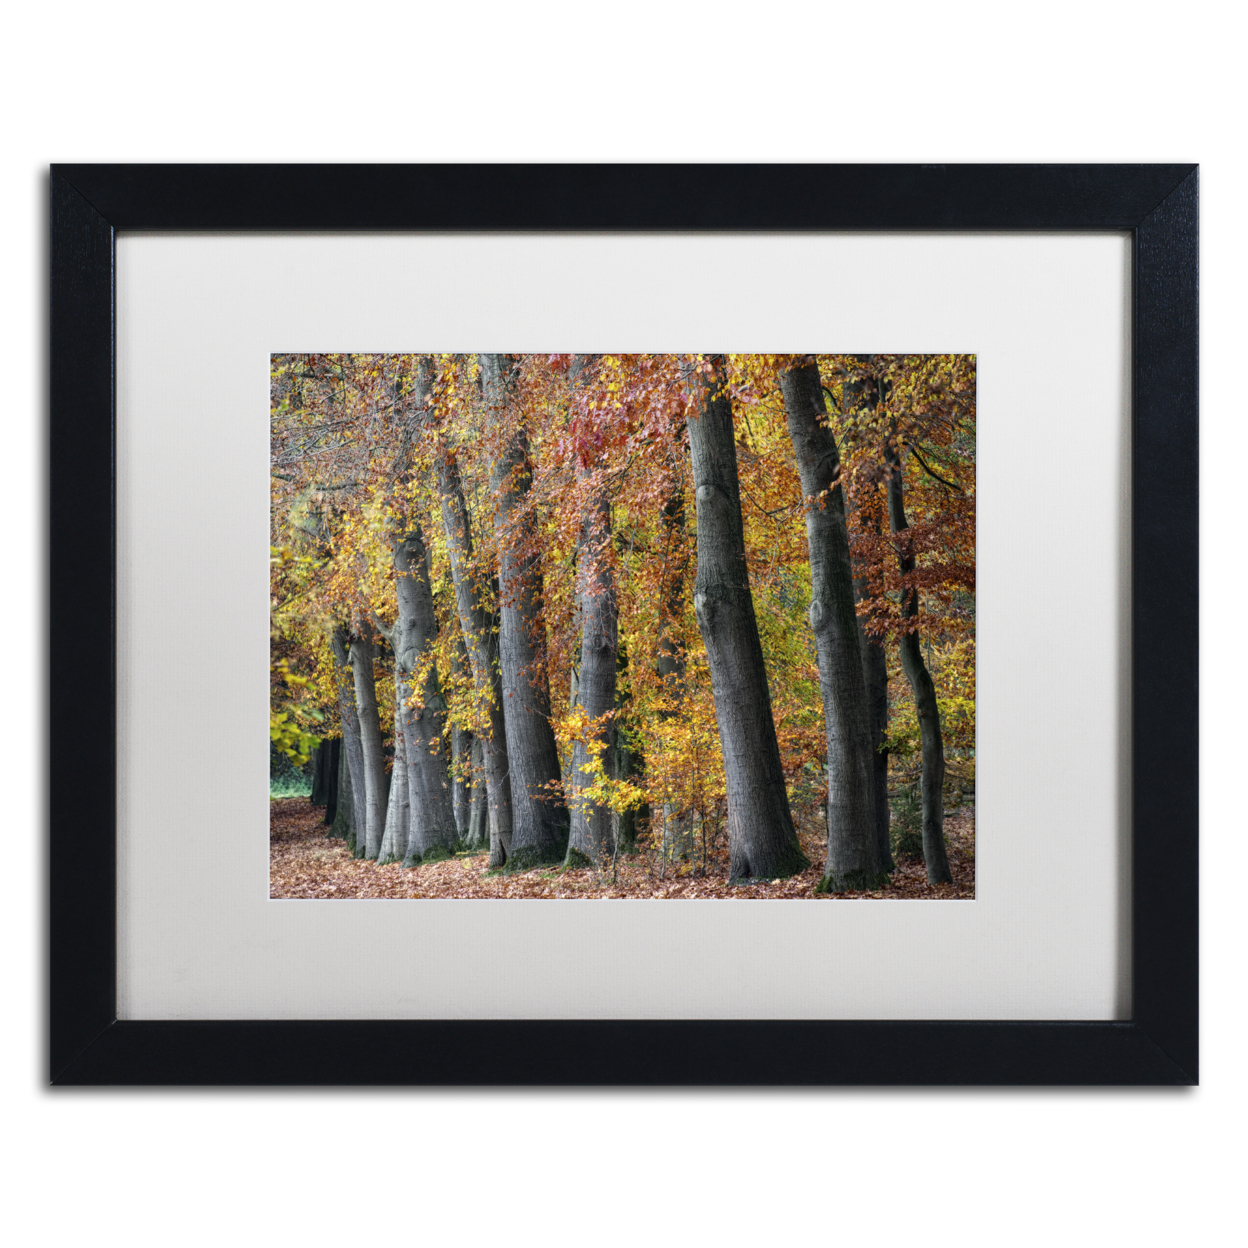 Cora Niele 'Autumn Beeches I' Black Wooden Framed Art 18 X 22 Inches